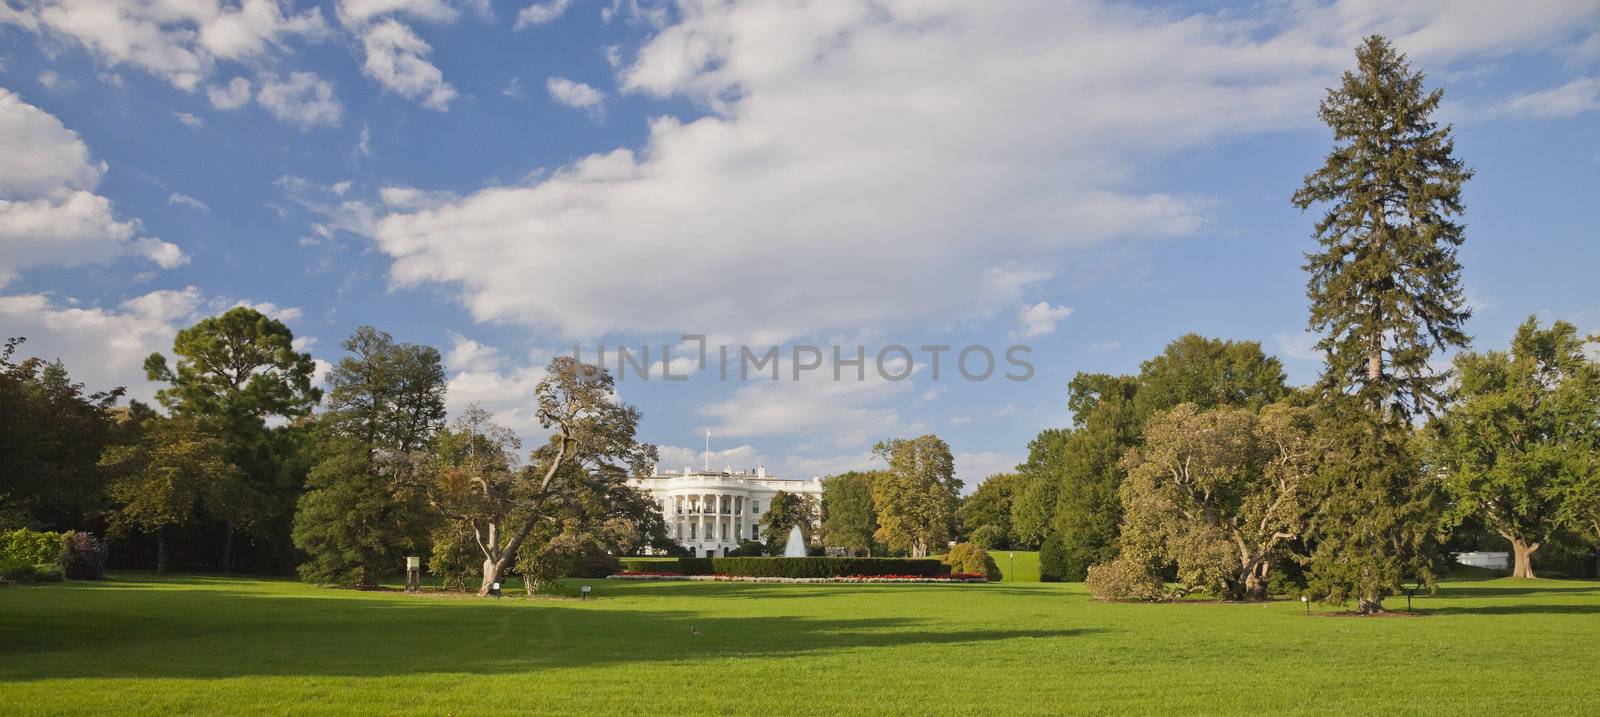 The White House by hanusst